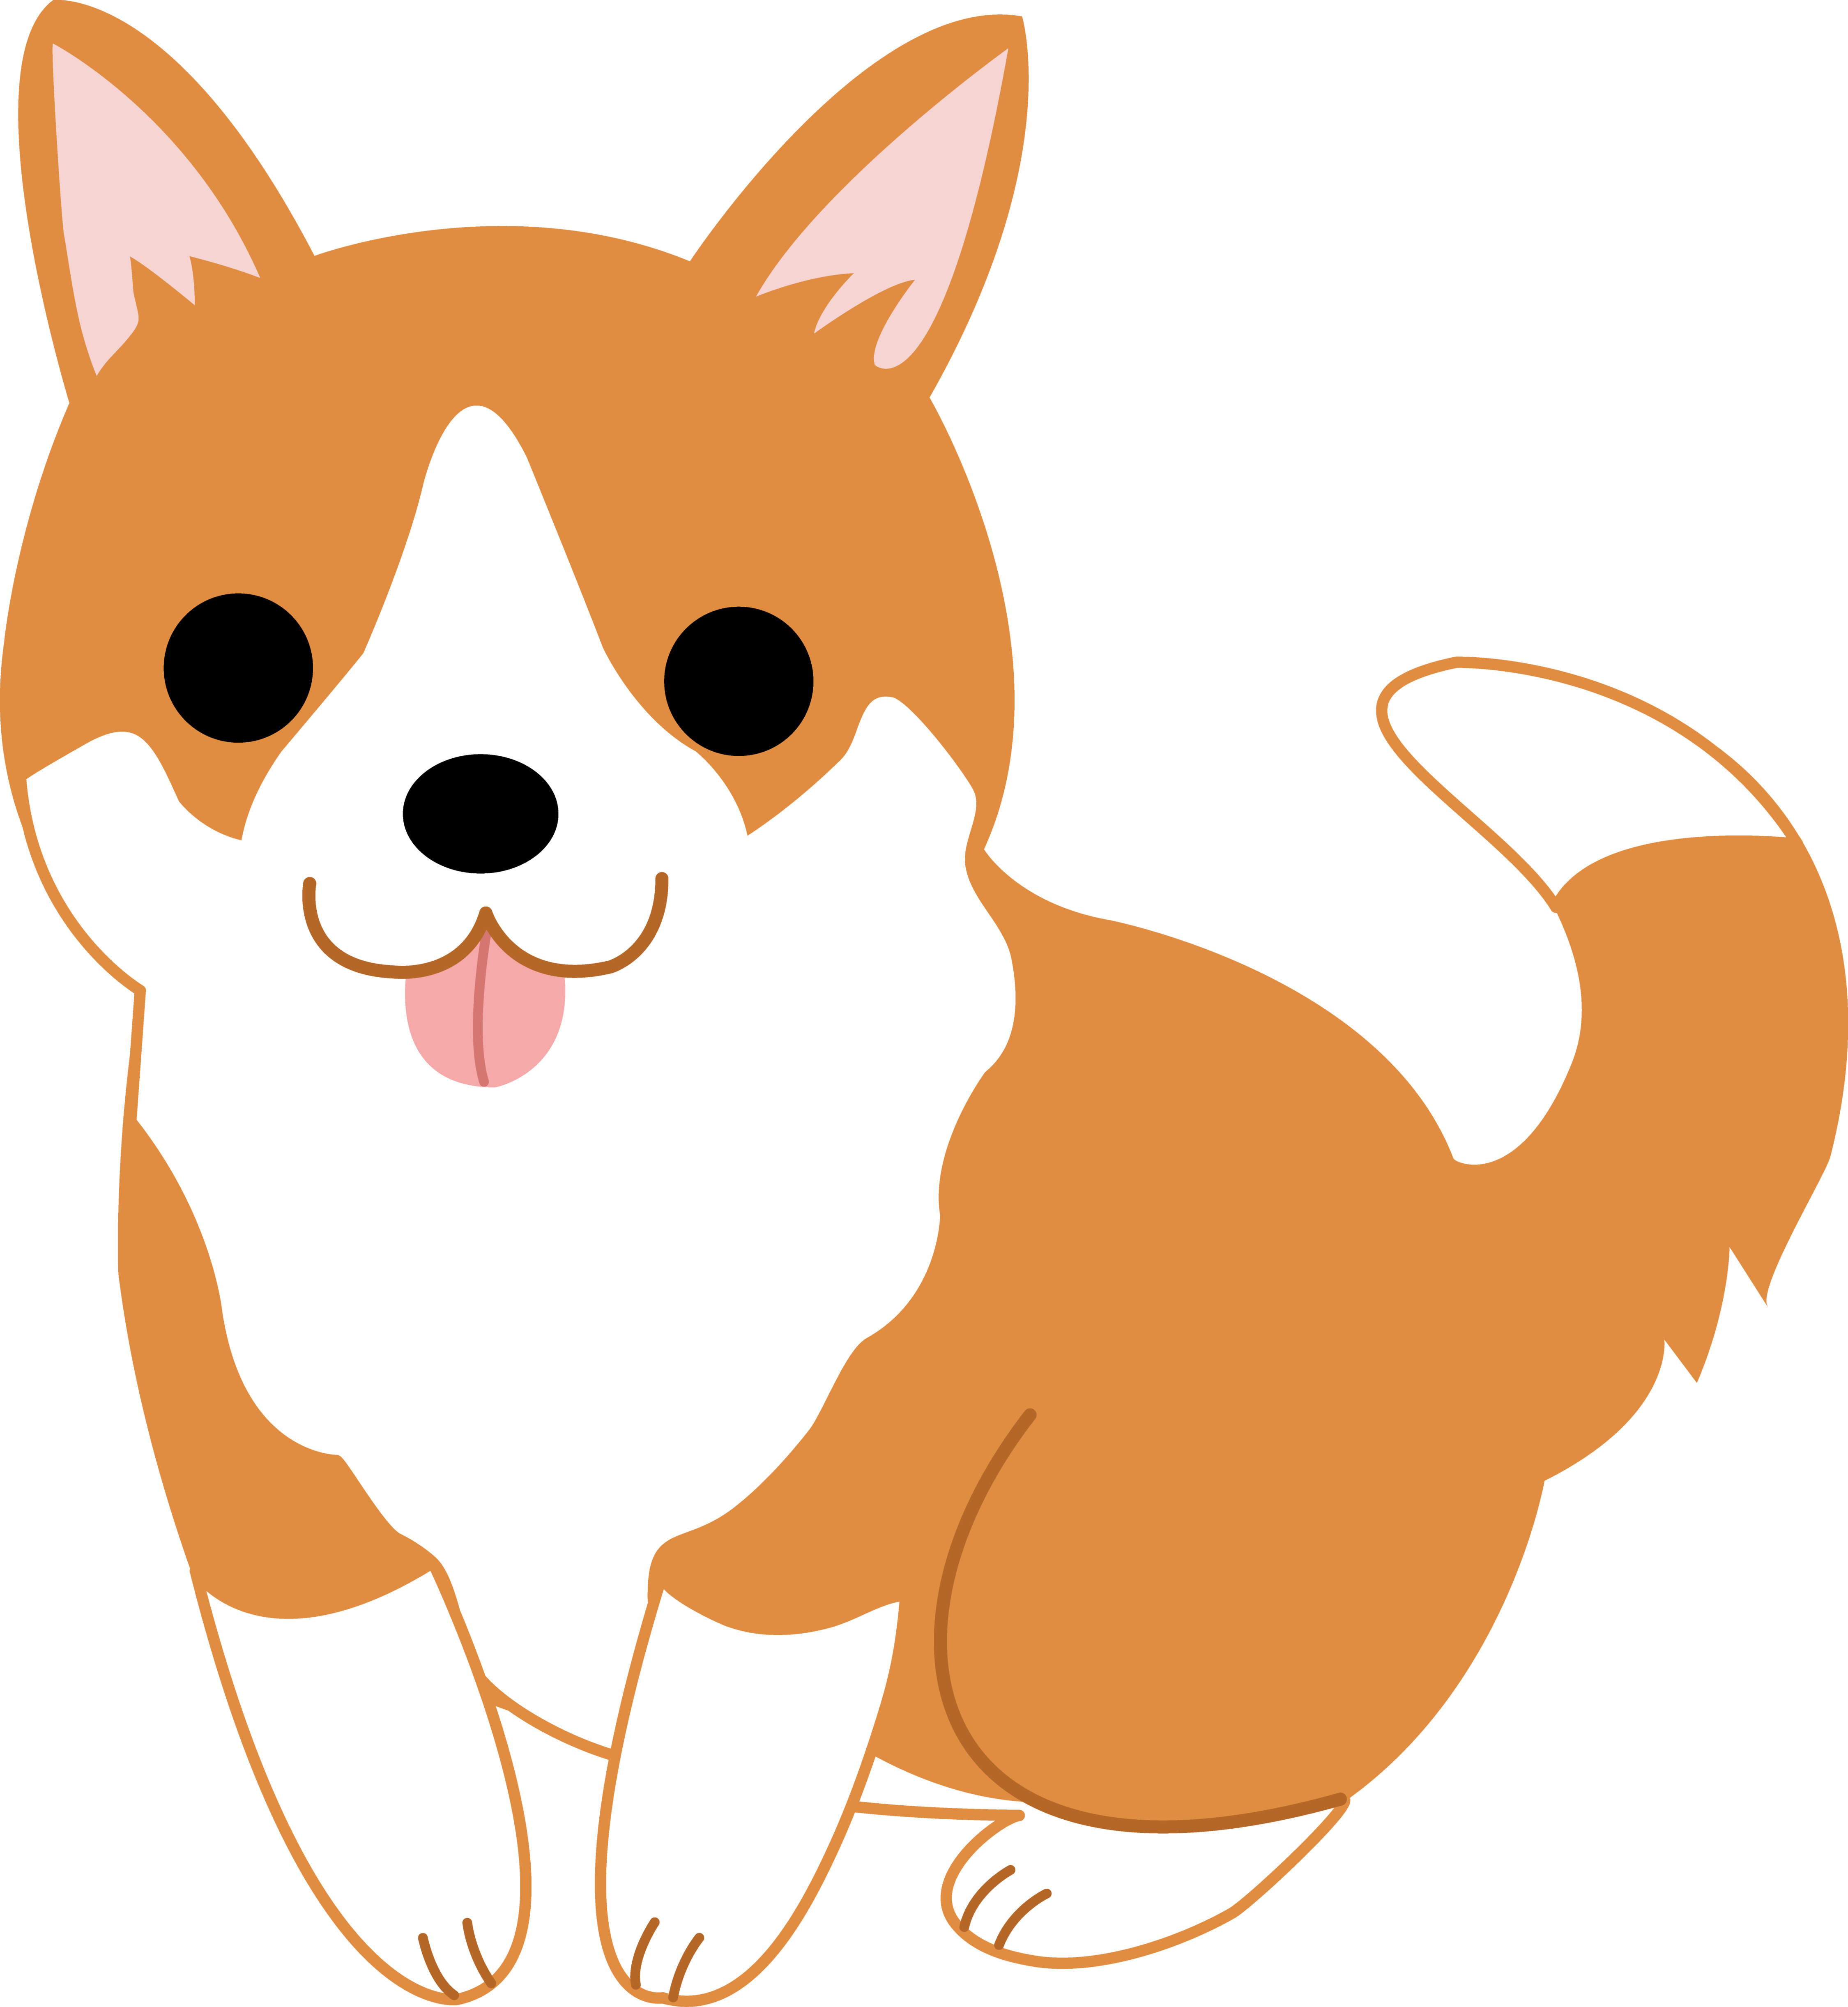 Images Of Cute Corgi Puppy Clip Art Wallpaper Animal Photo And